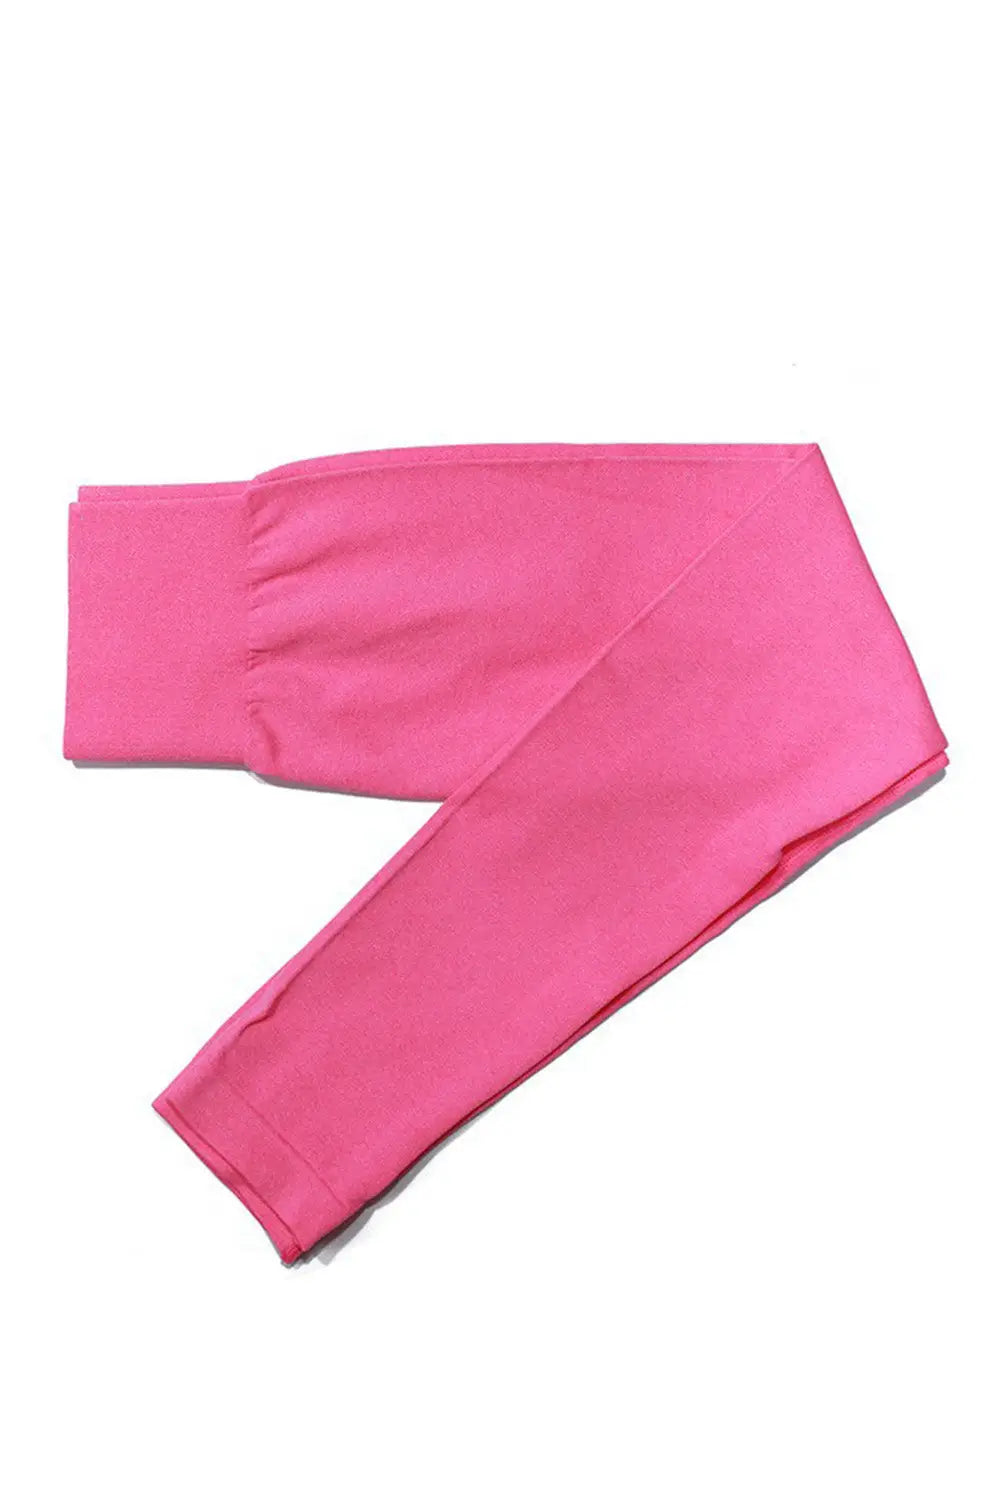 Rose solid color seamless high waist yoga pants - s - active shorts